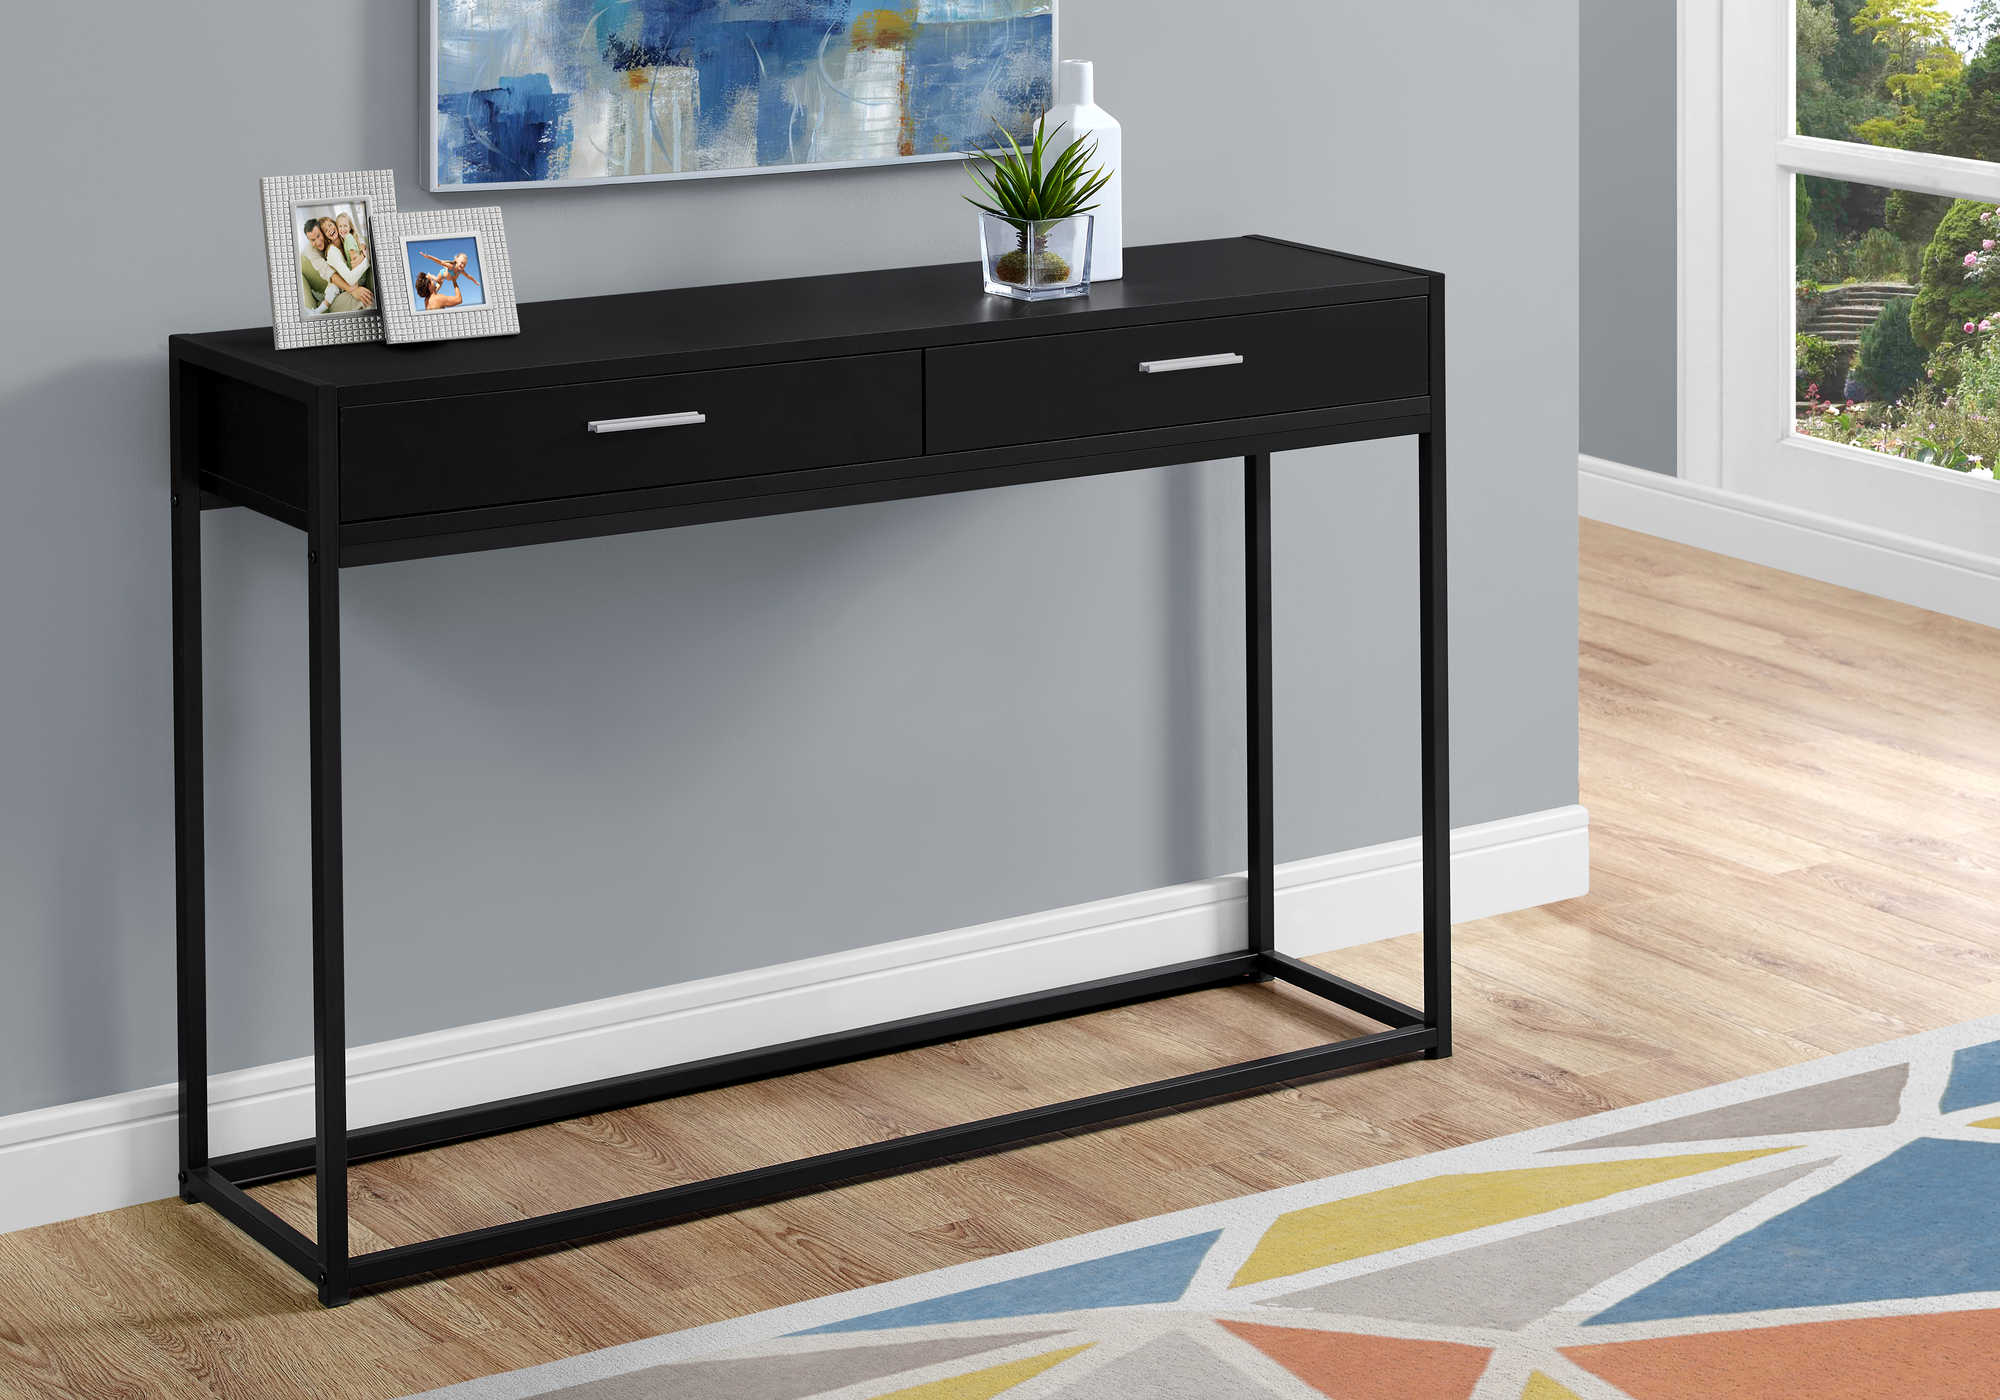 BEDROOM ACCENT CONSOLE TABLE - 48"L / BLACK / BLACK METAL HALL CONSOLE